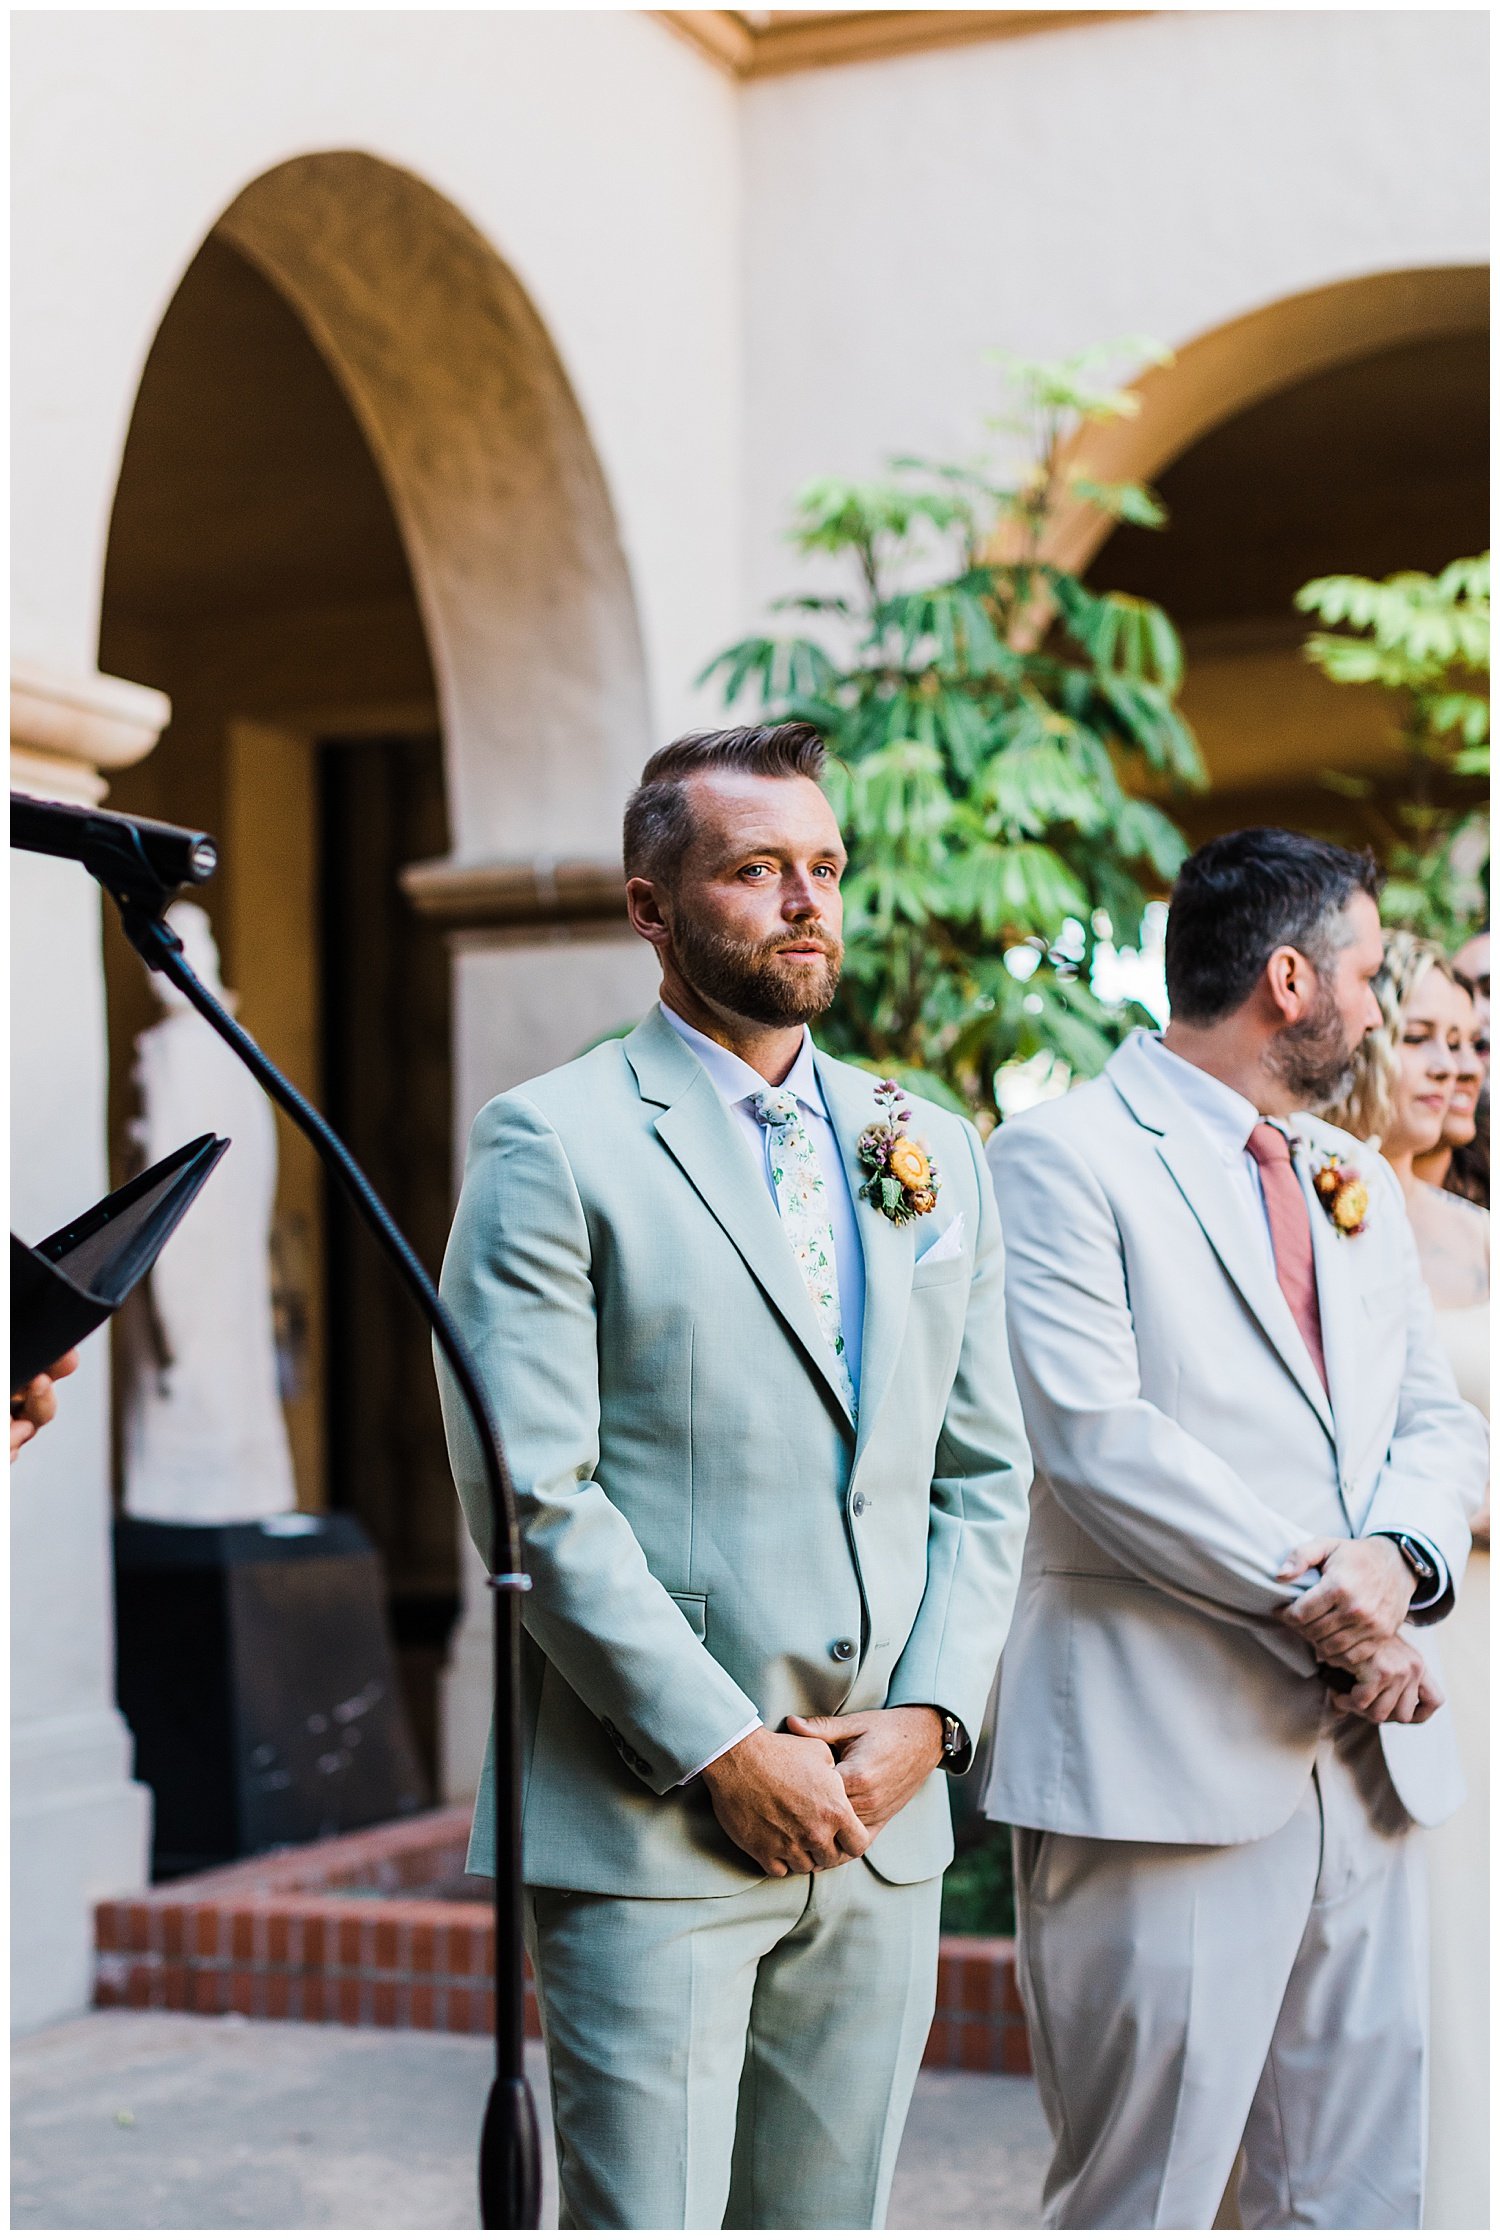 San Diego groom waiting for bride at alter